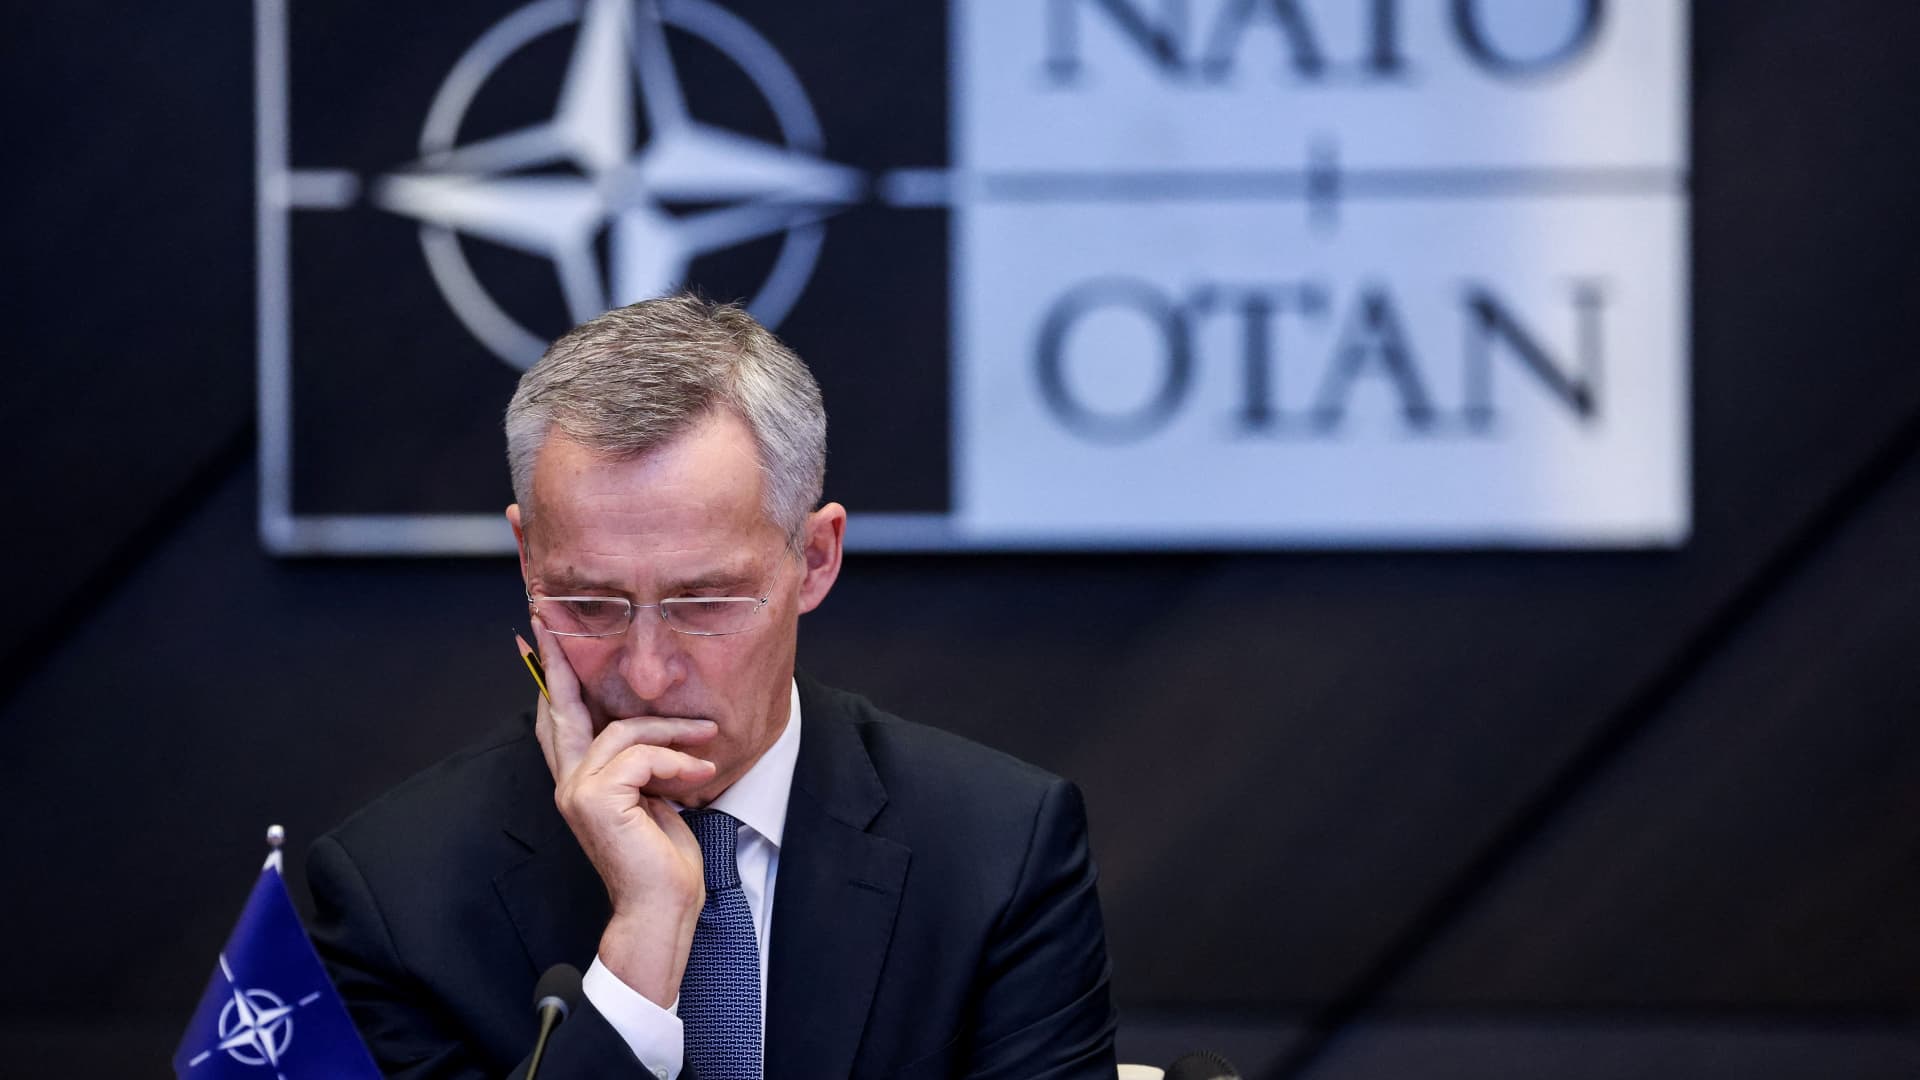 NATO Secretary General Jens Stoltenberg attends the opening of a NATO video summit on Russia's invasion of the Ukraine at the NATO headquarters in Brussels on February 25, 2022.